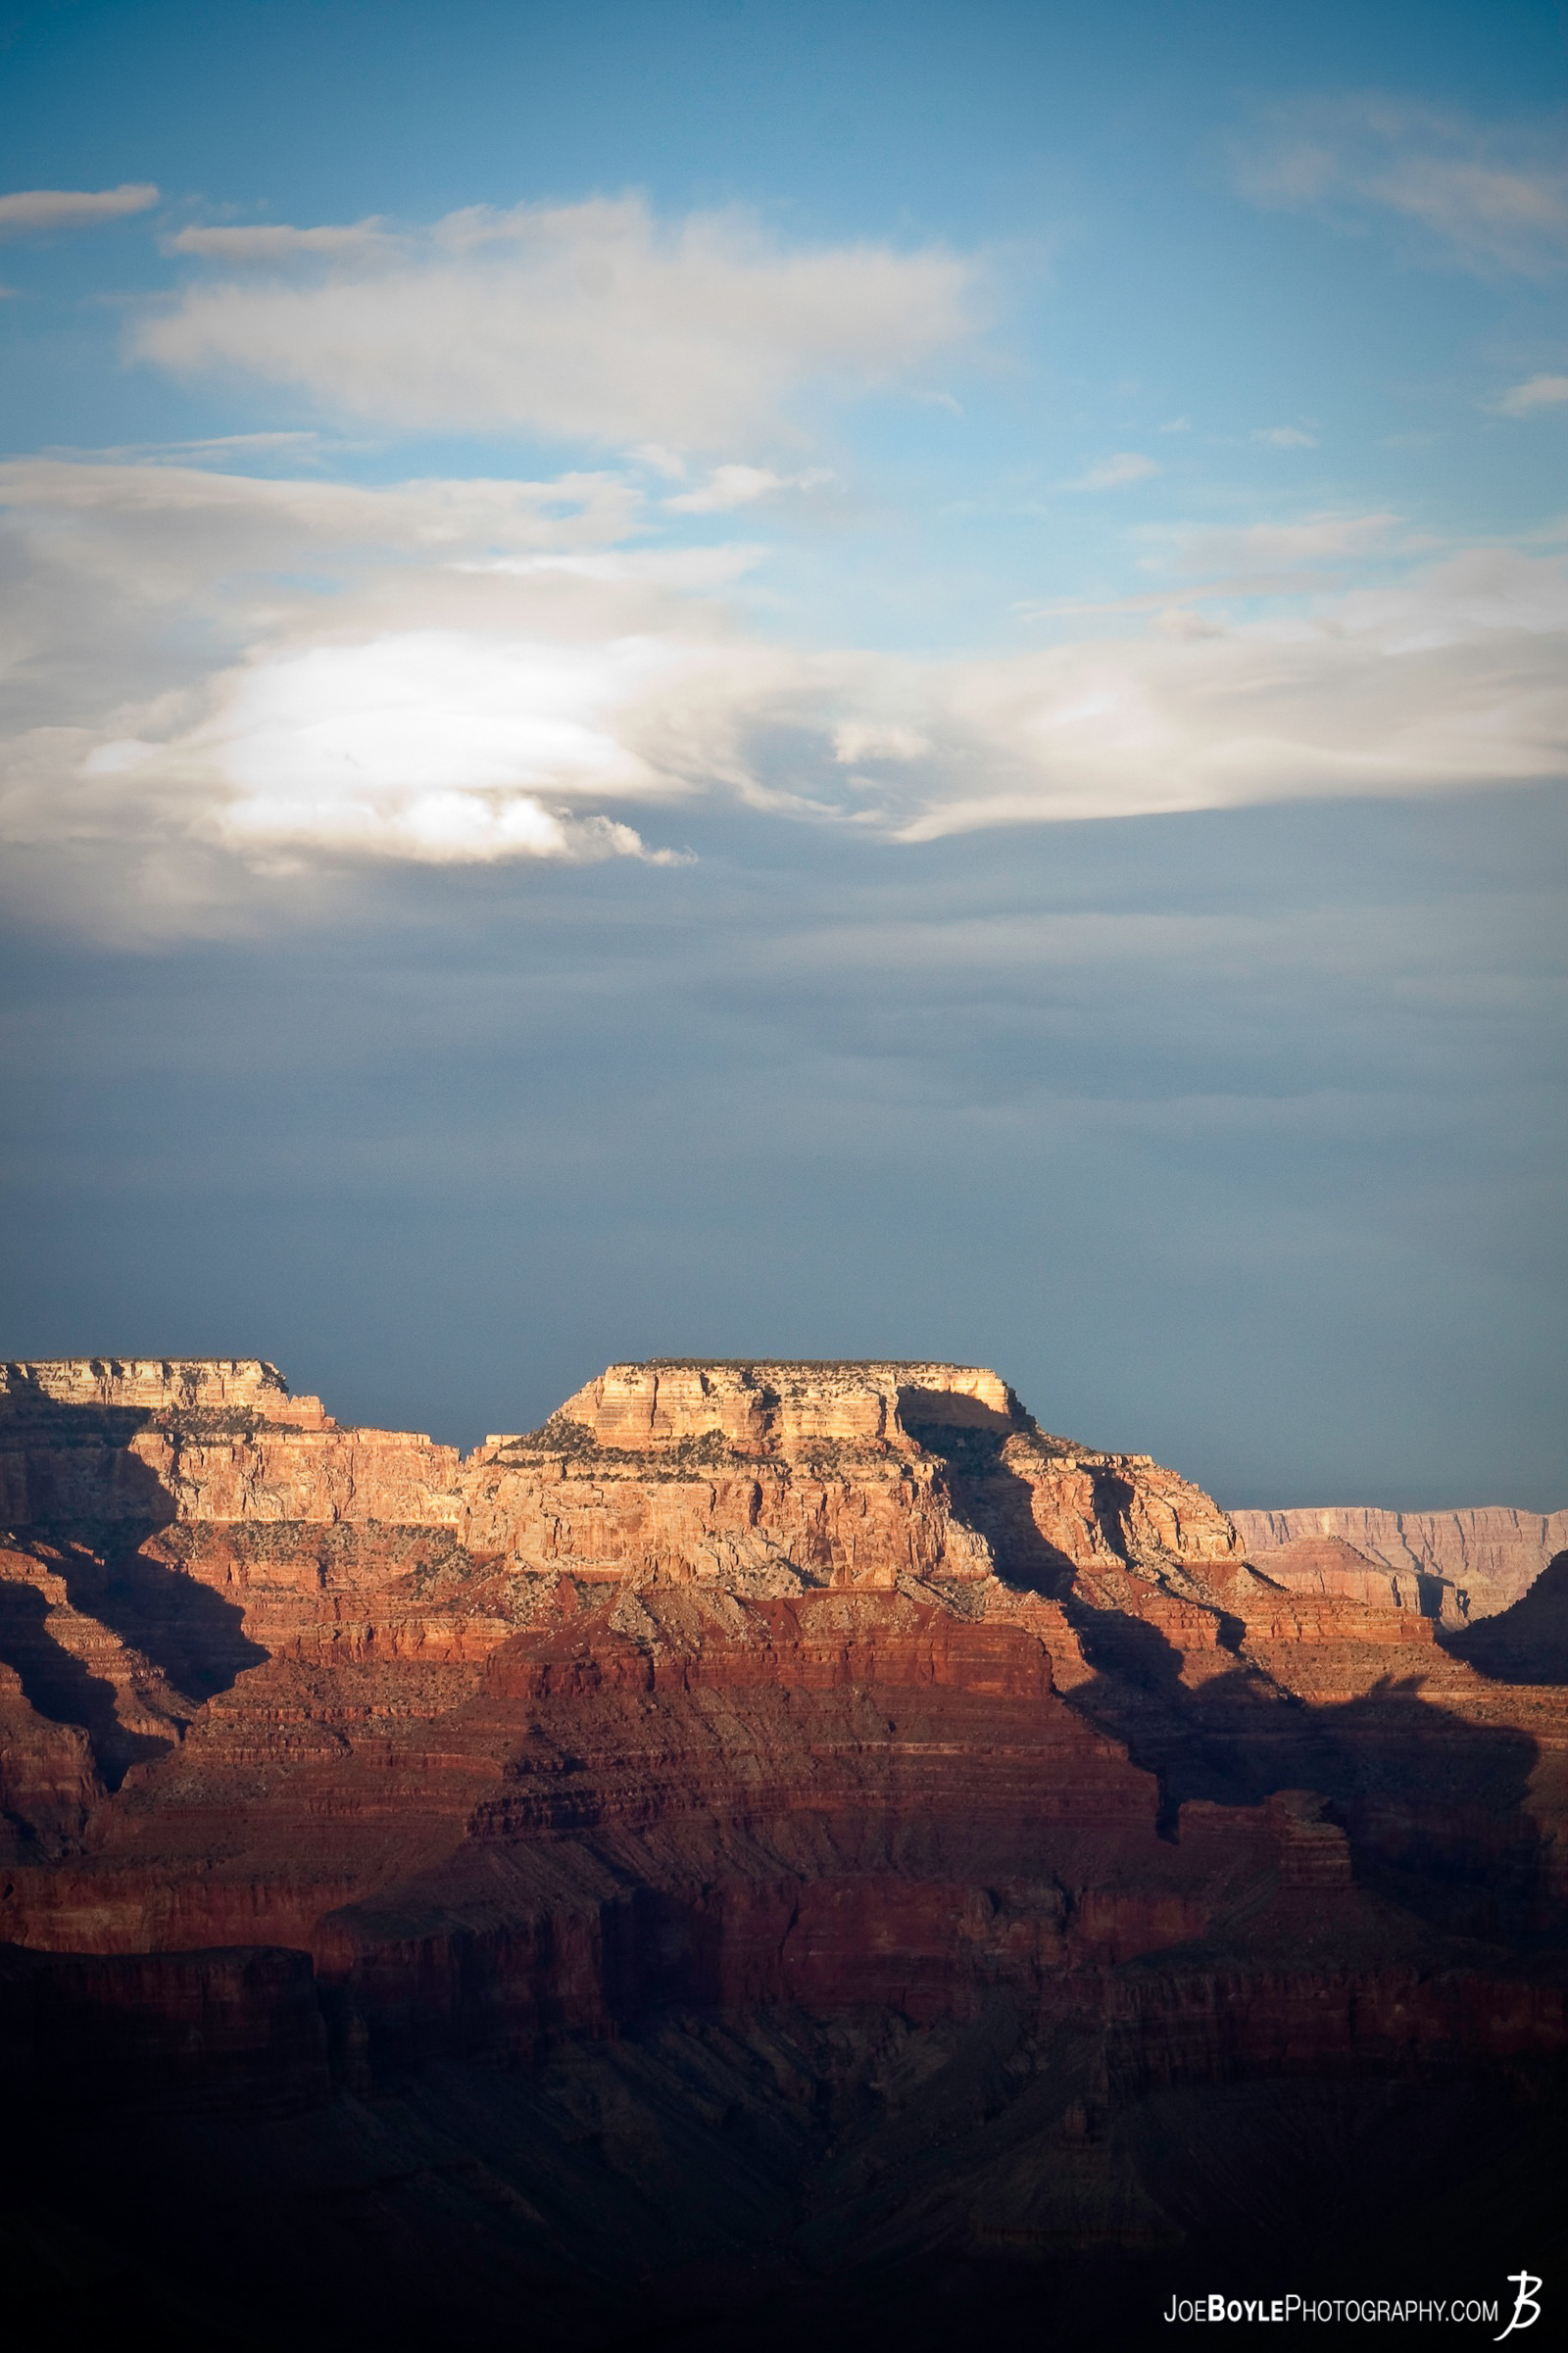  Captured during a chilly evening at sunset, this image of just one facet of the Grand Canyon is shown from Yaki Point. 